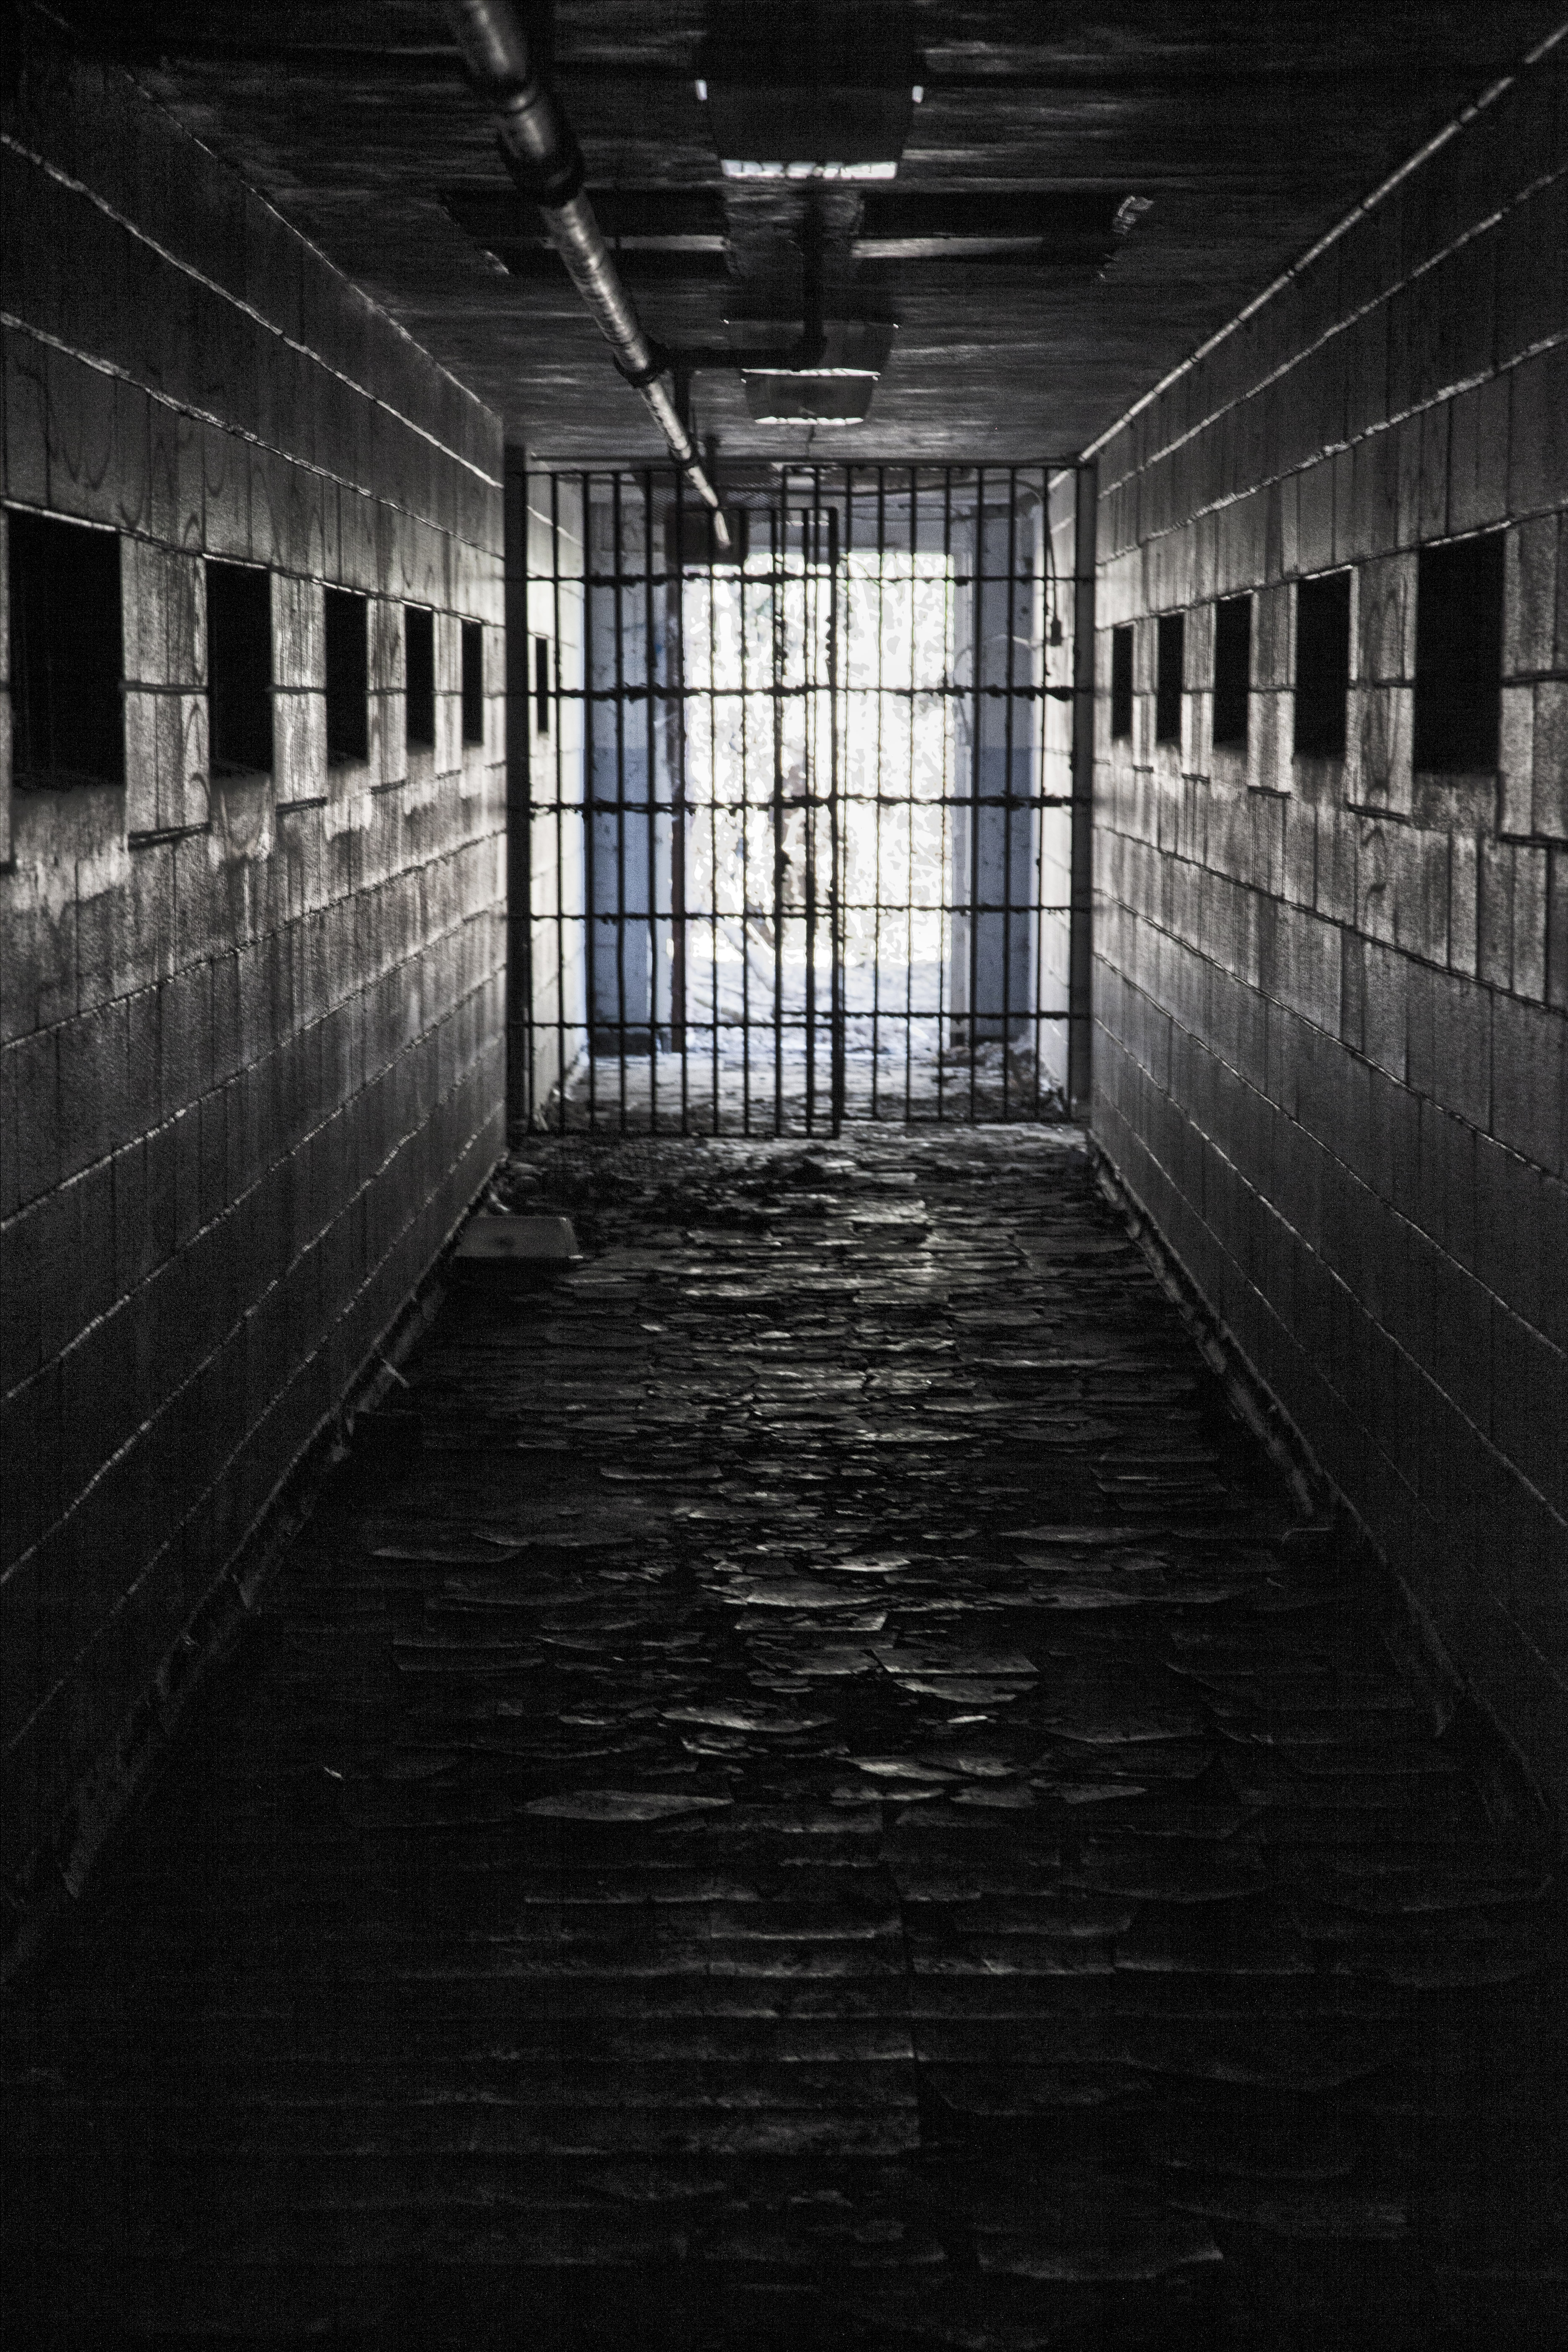 Gallery For Gt Prison Background